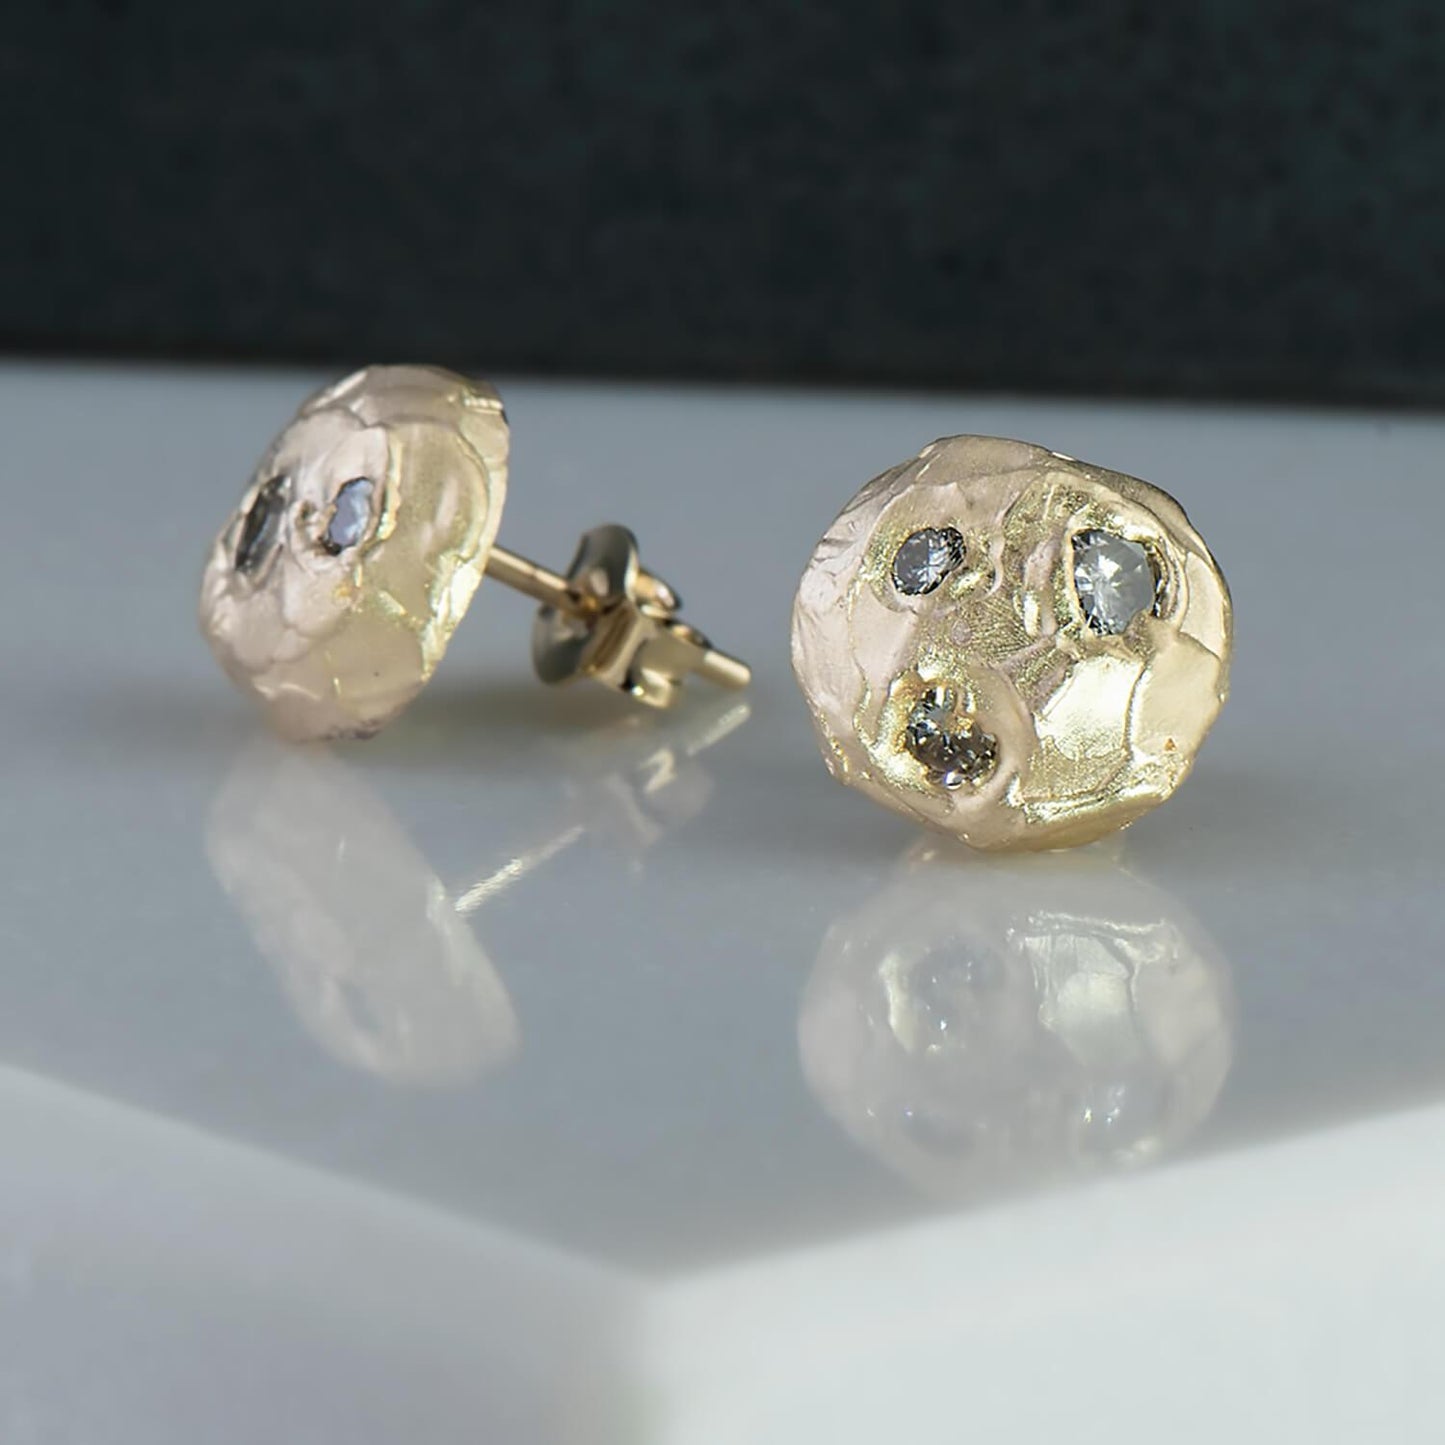 14 karat recycled yellow gold studs with 5 recycled natural colourless diamonds with a total wight of 0.52 carats. The profile is a half sphere whilst having a luscious texture helping light reflect off.